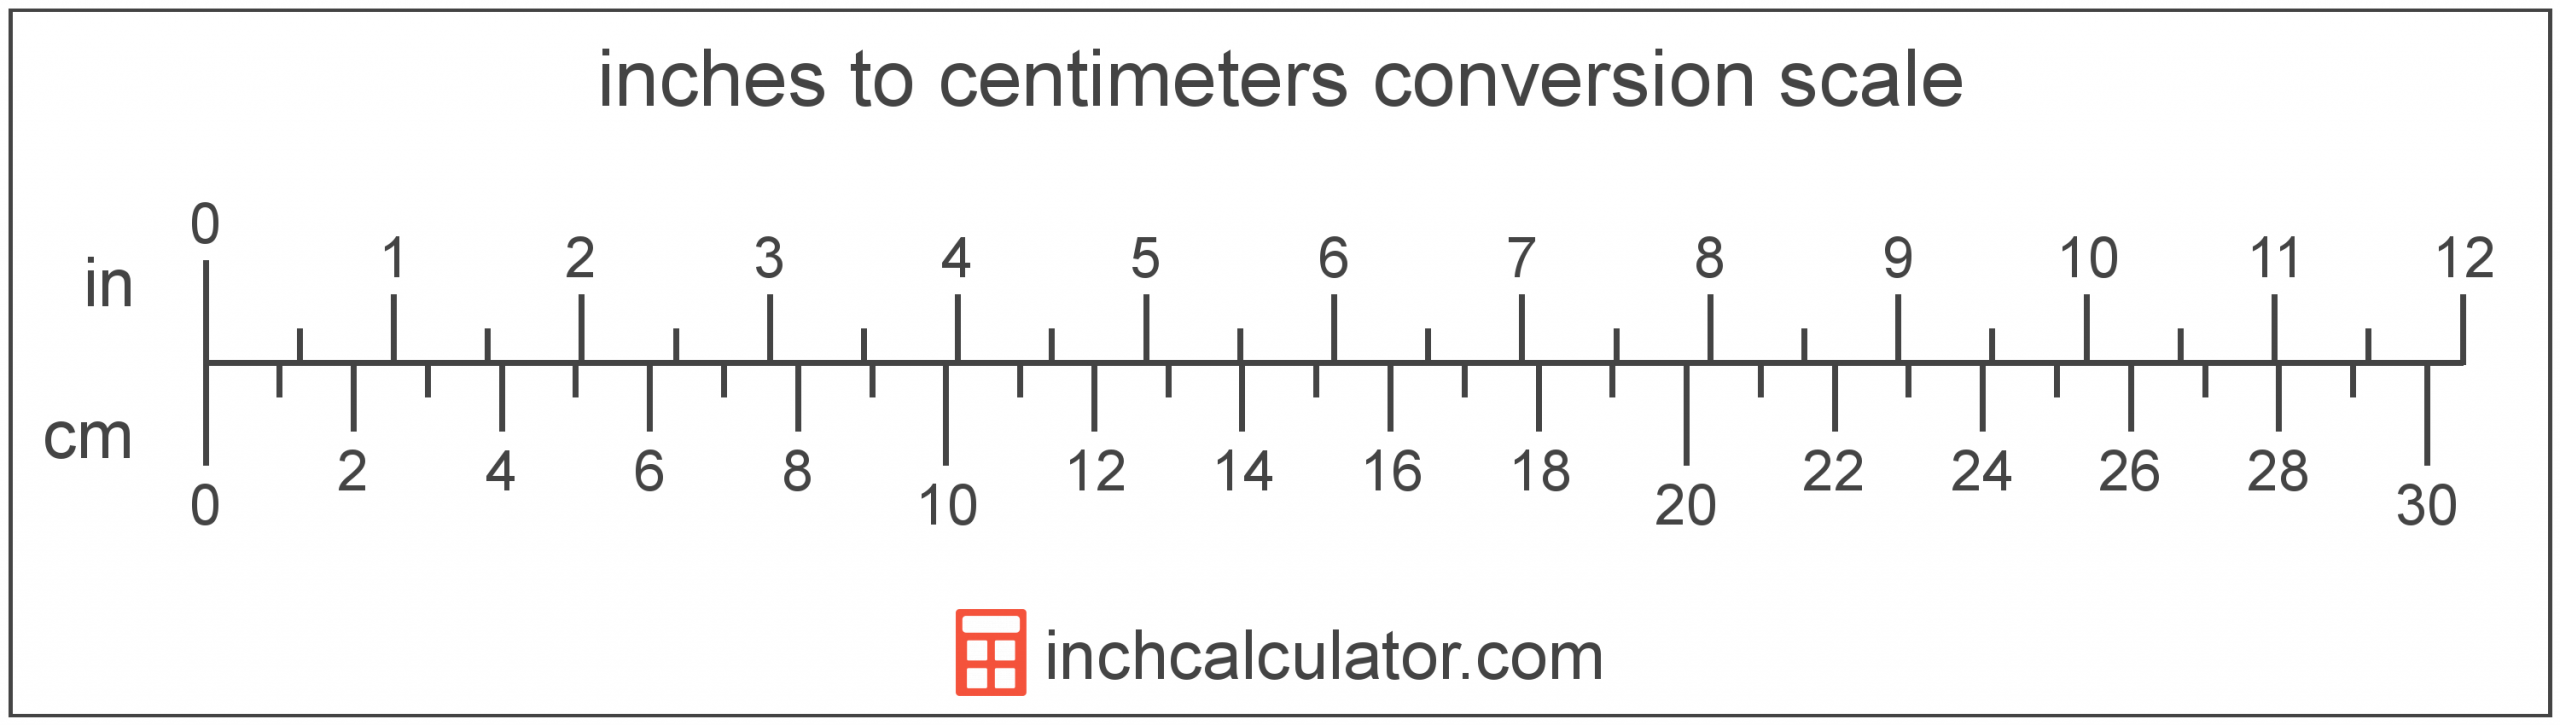 Cm To Inches Conversion (Centimeters To Inches) - Inch